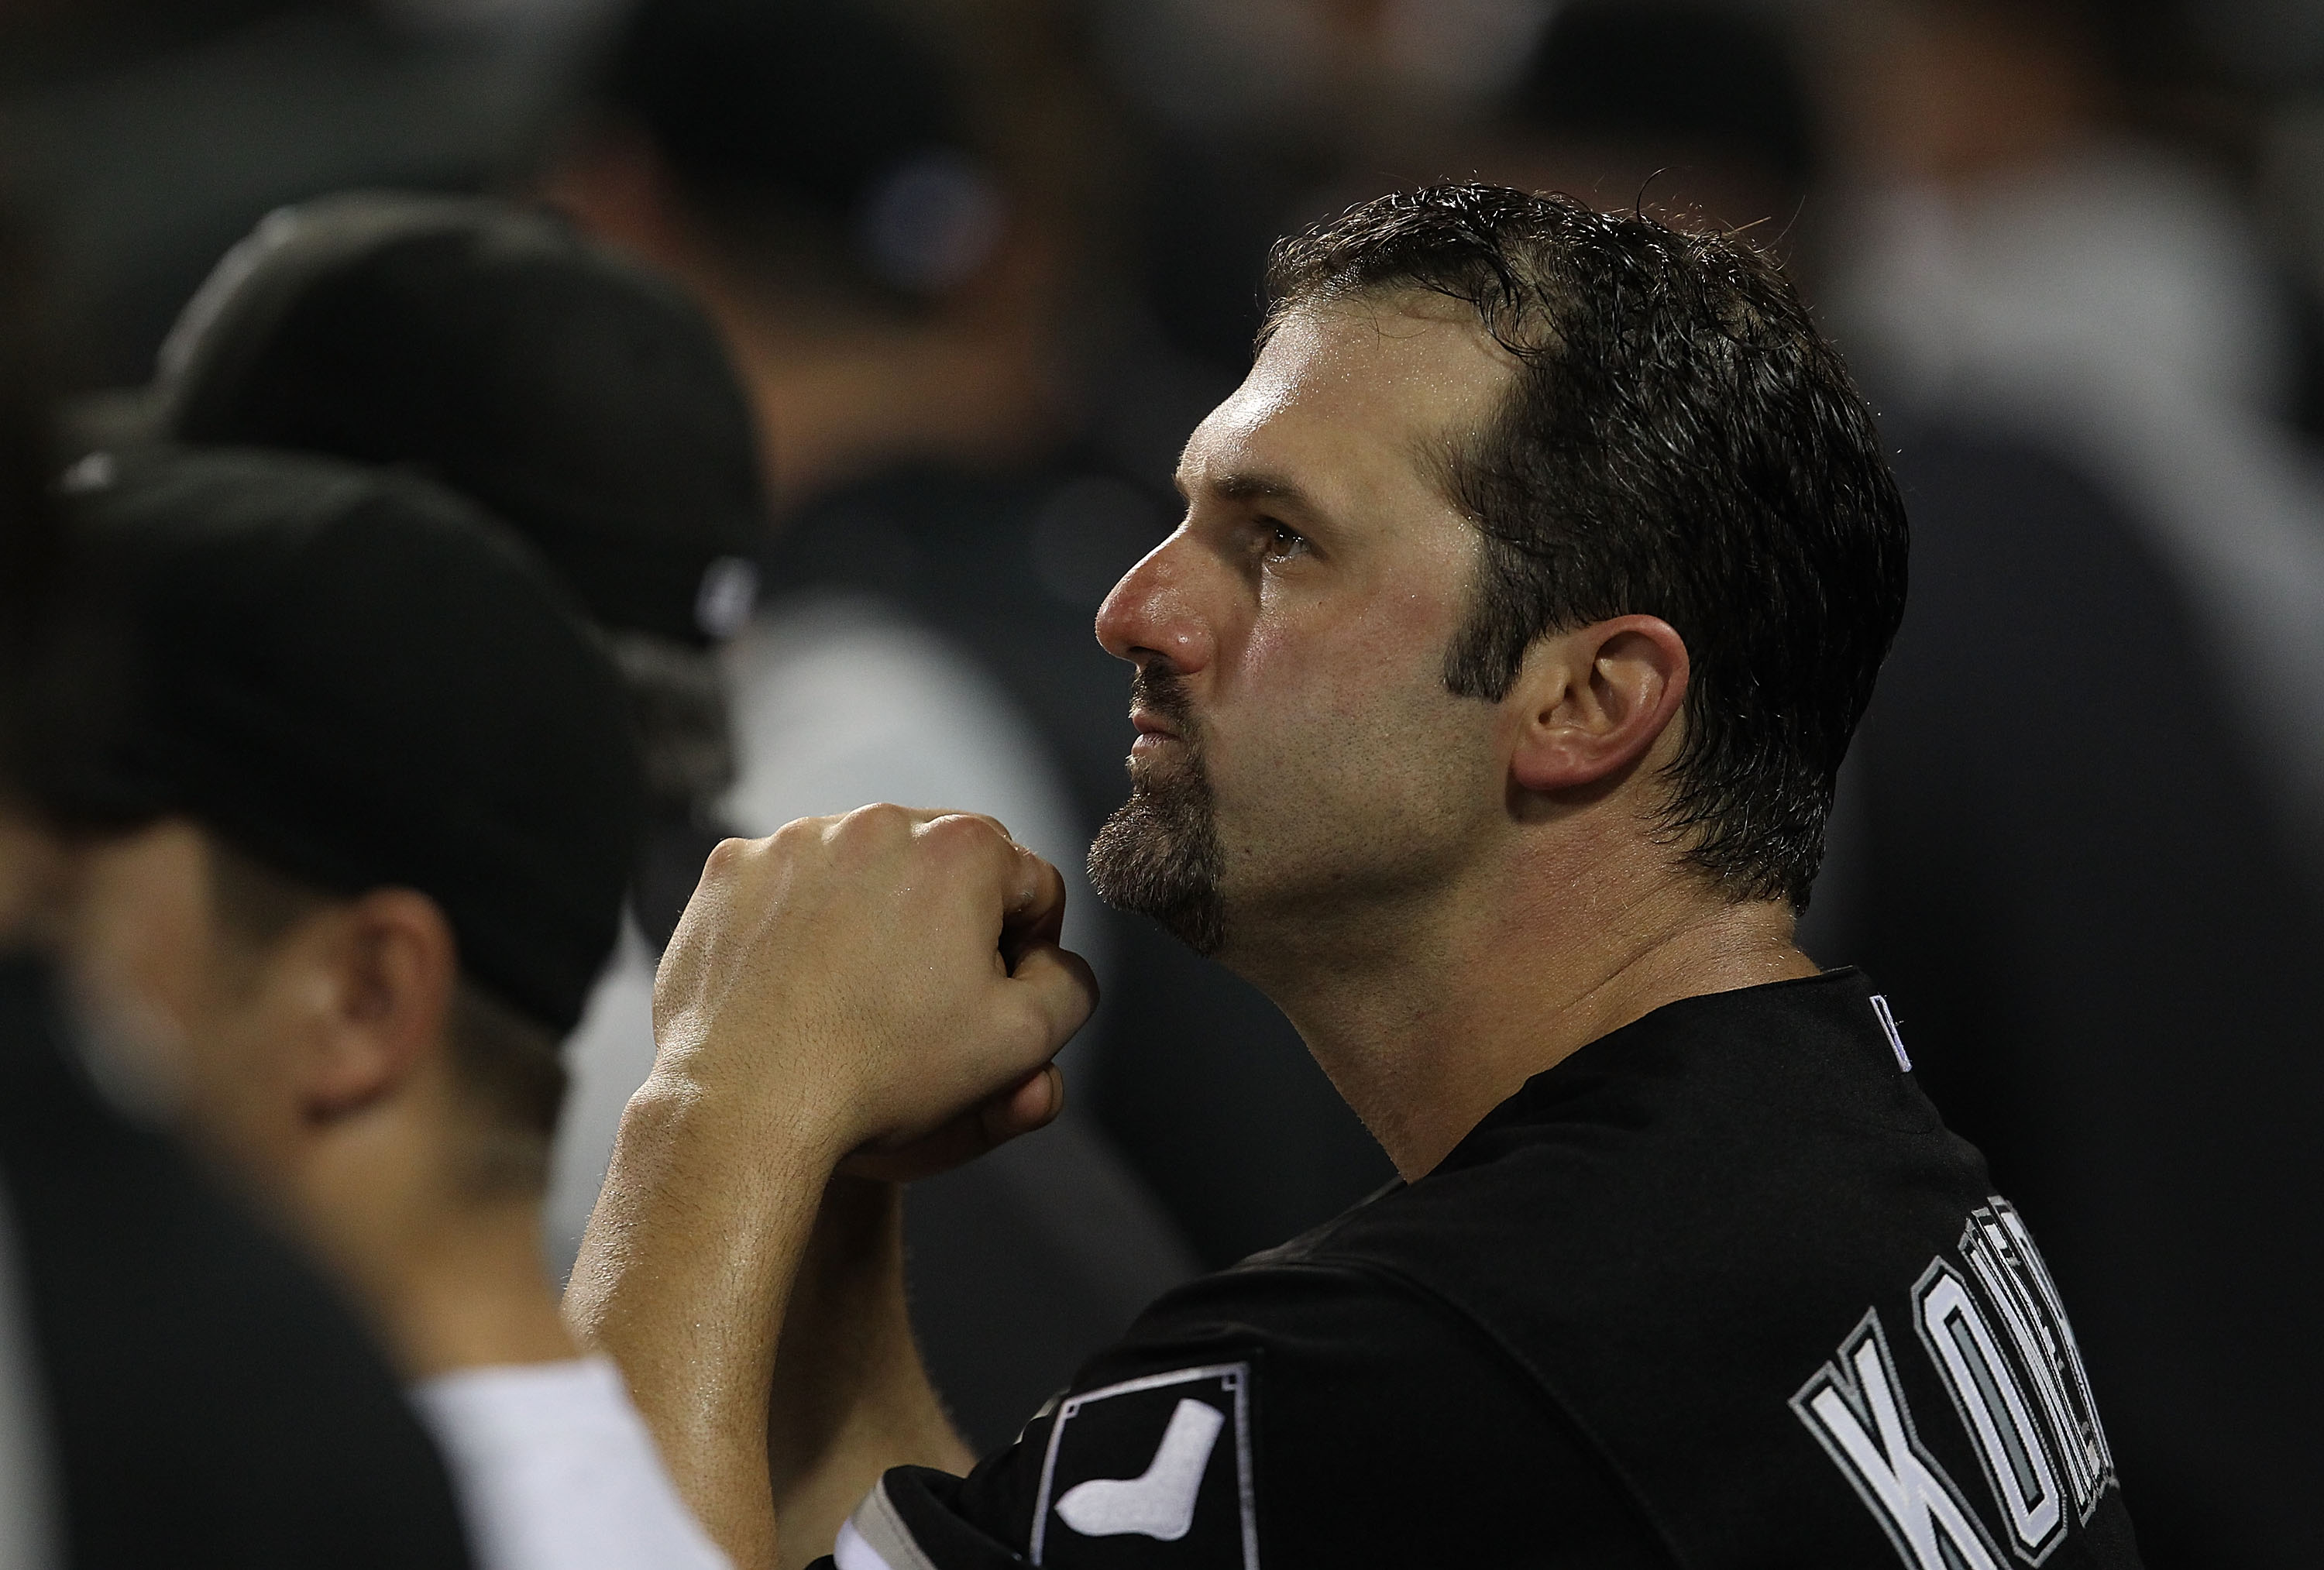 CHICAGO - AUGUST 10: Paul Konerko #14 of the Chicago White Sox watches from the dugout as his teammates take on the Minnesota Twins at U.S. Cellular Field on August 10, 2010 in Chicago, Illinois. The Twins defeated the White Sox 12-6. (Photo by Jonathan D